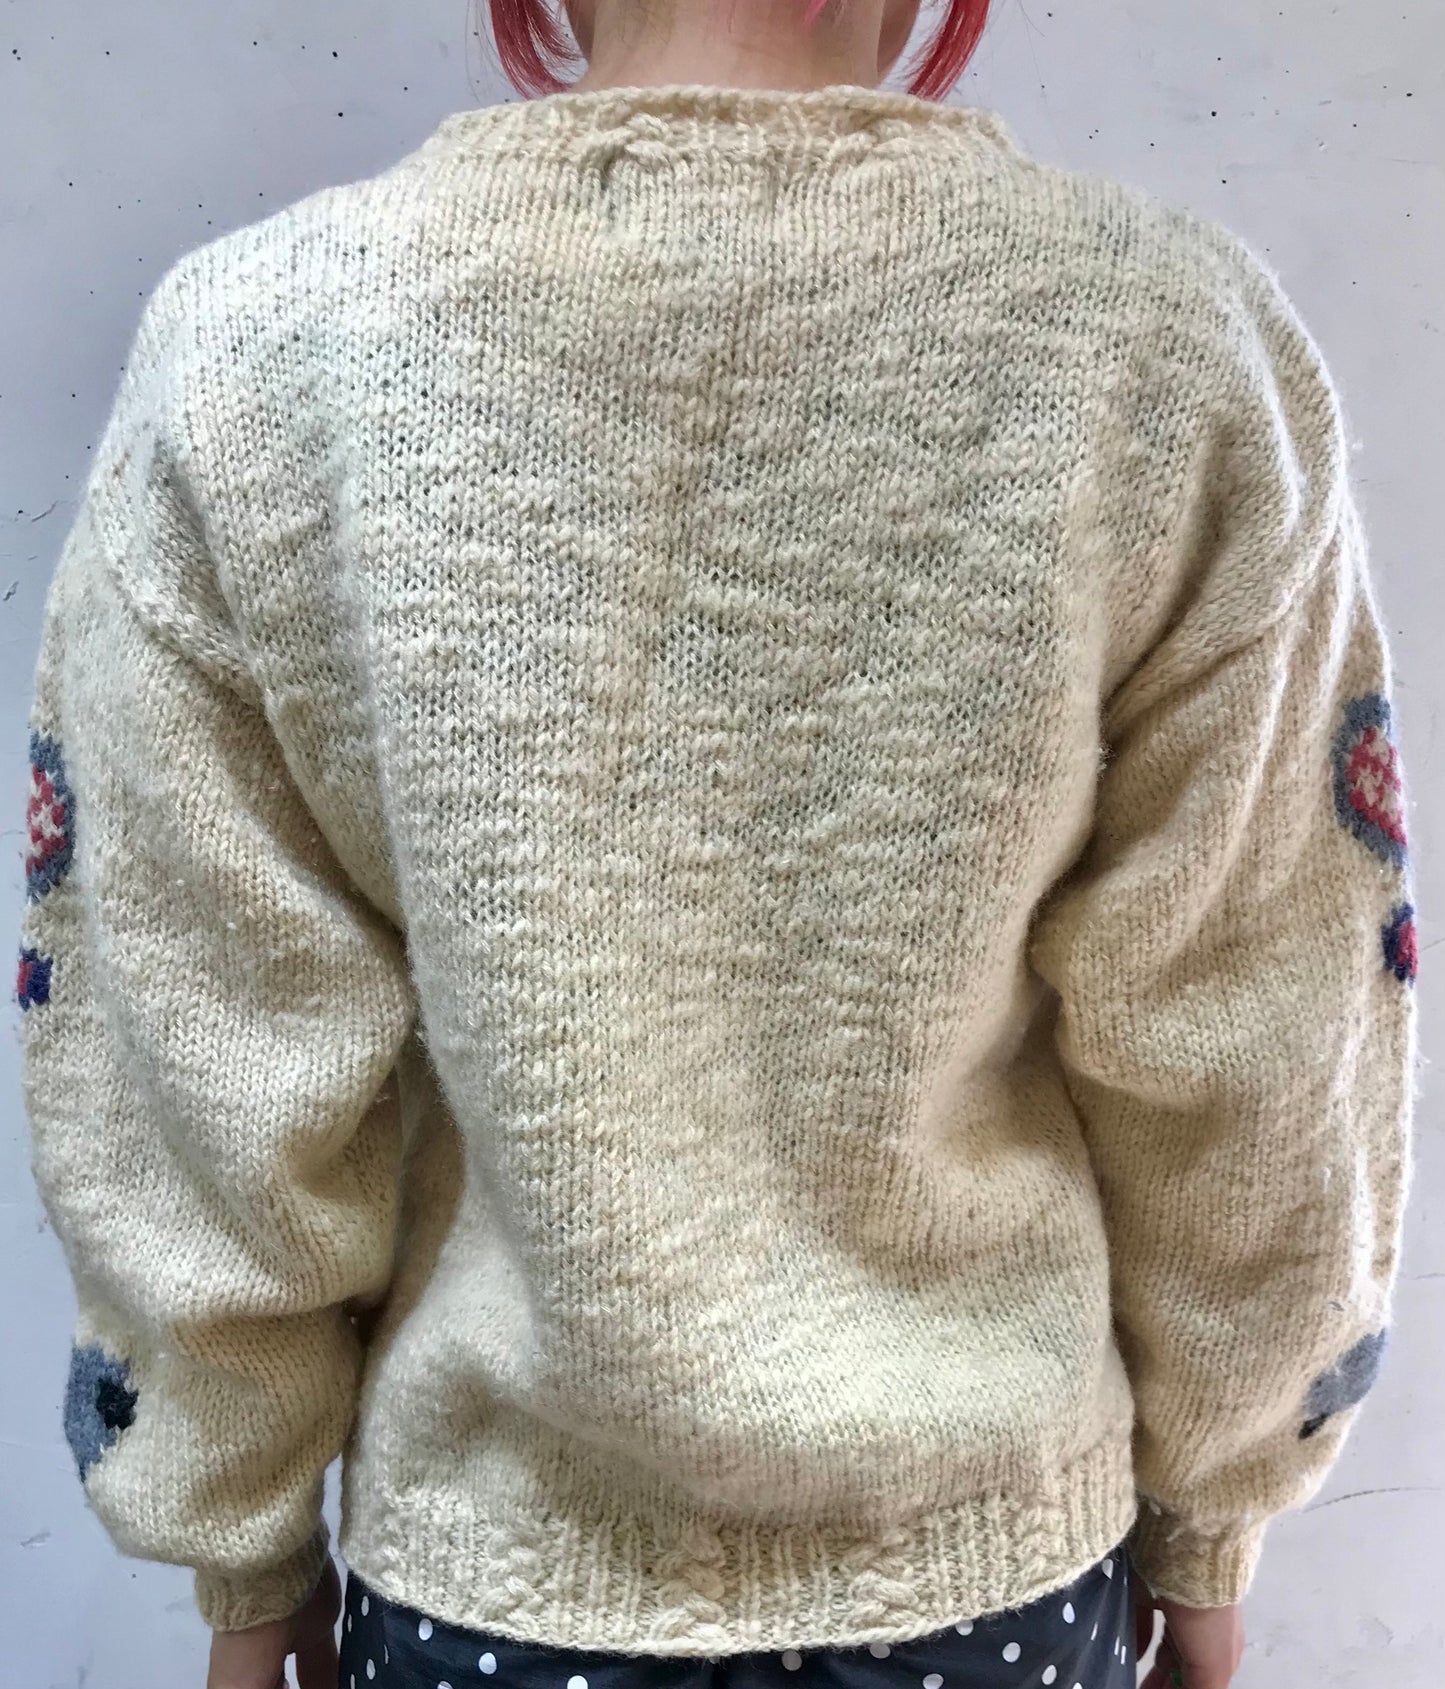 Vintage Hand Knit Sweater 〜Wool Rich〜 [I25080]